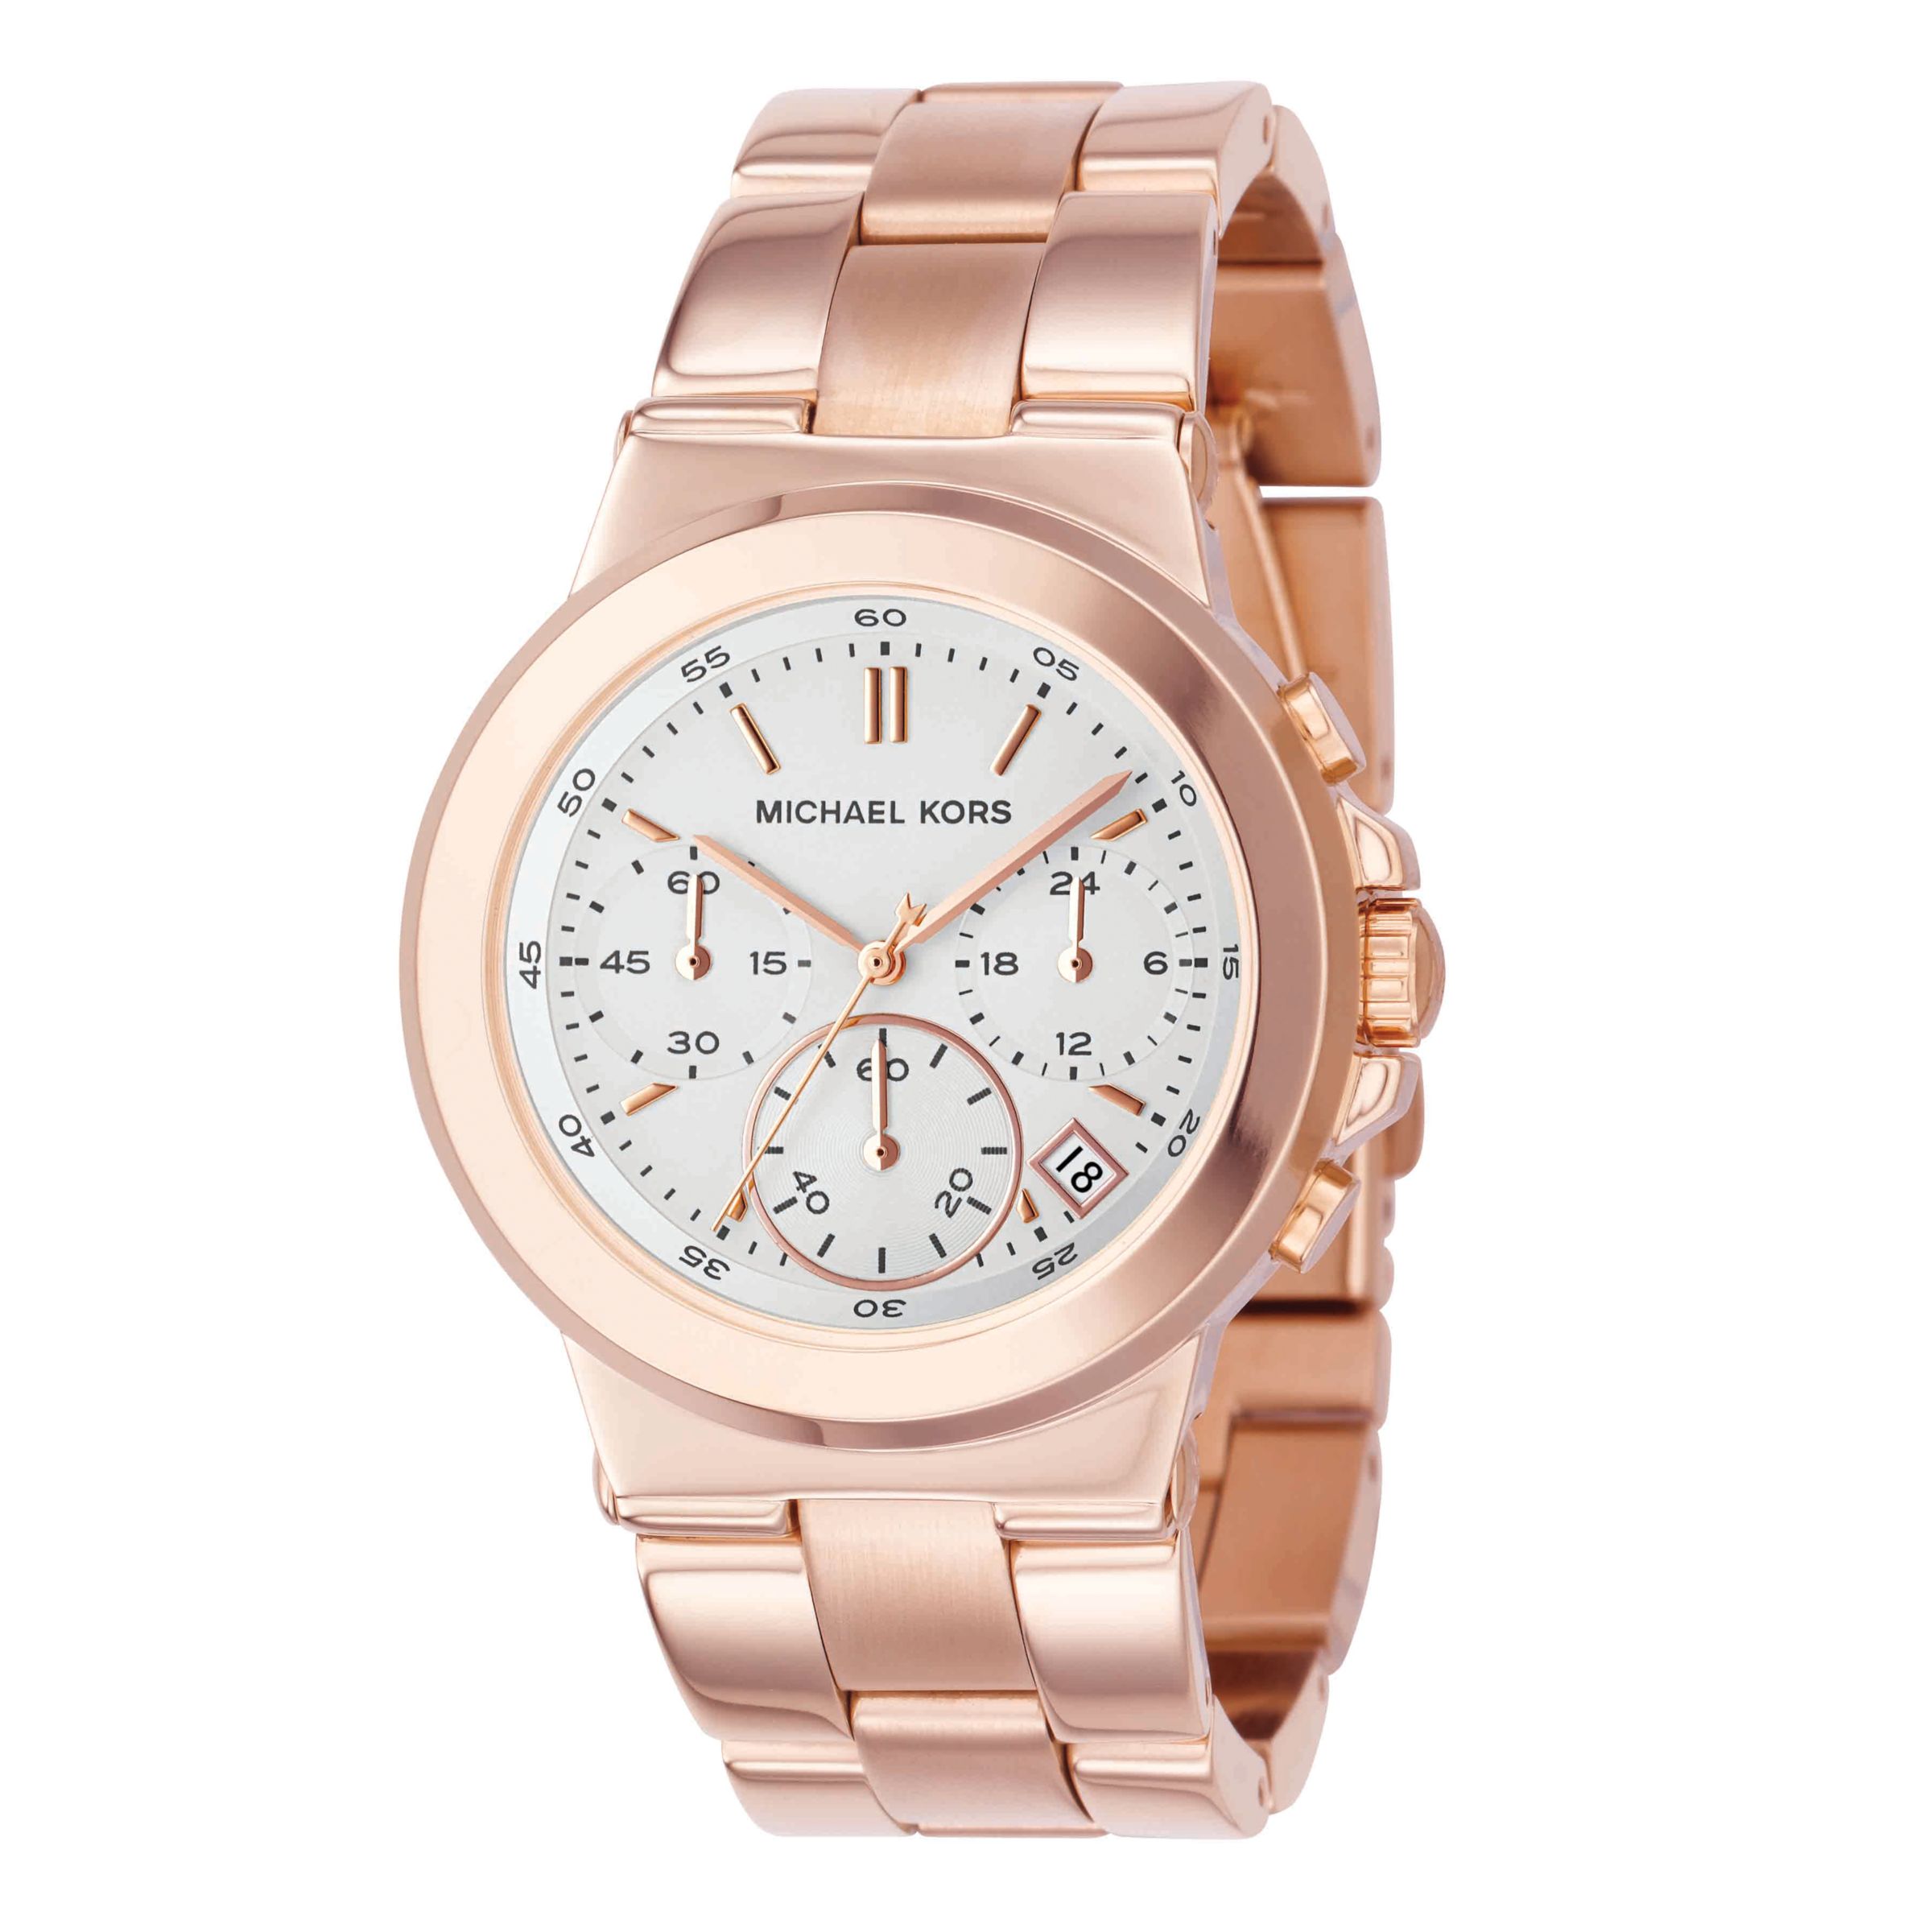 michael kors rose gold chronograph watch. Product middot; Michael